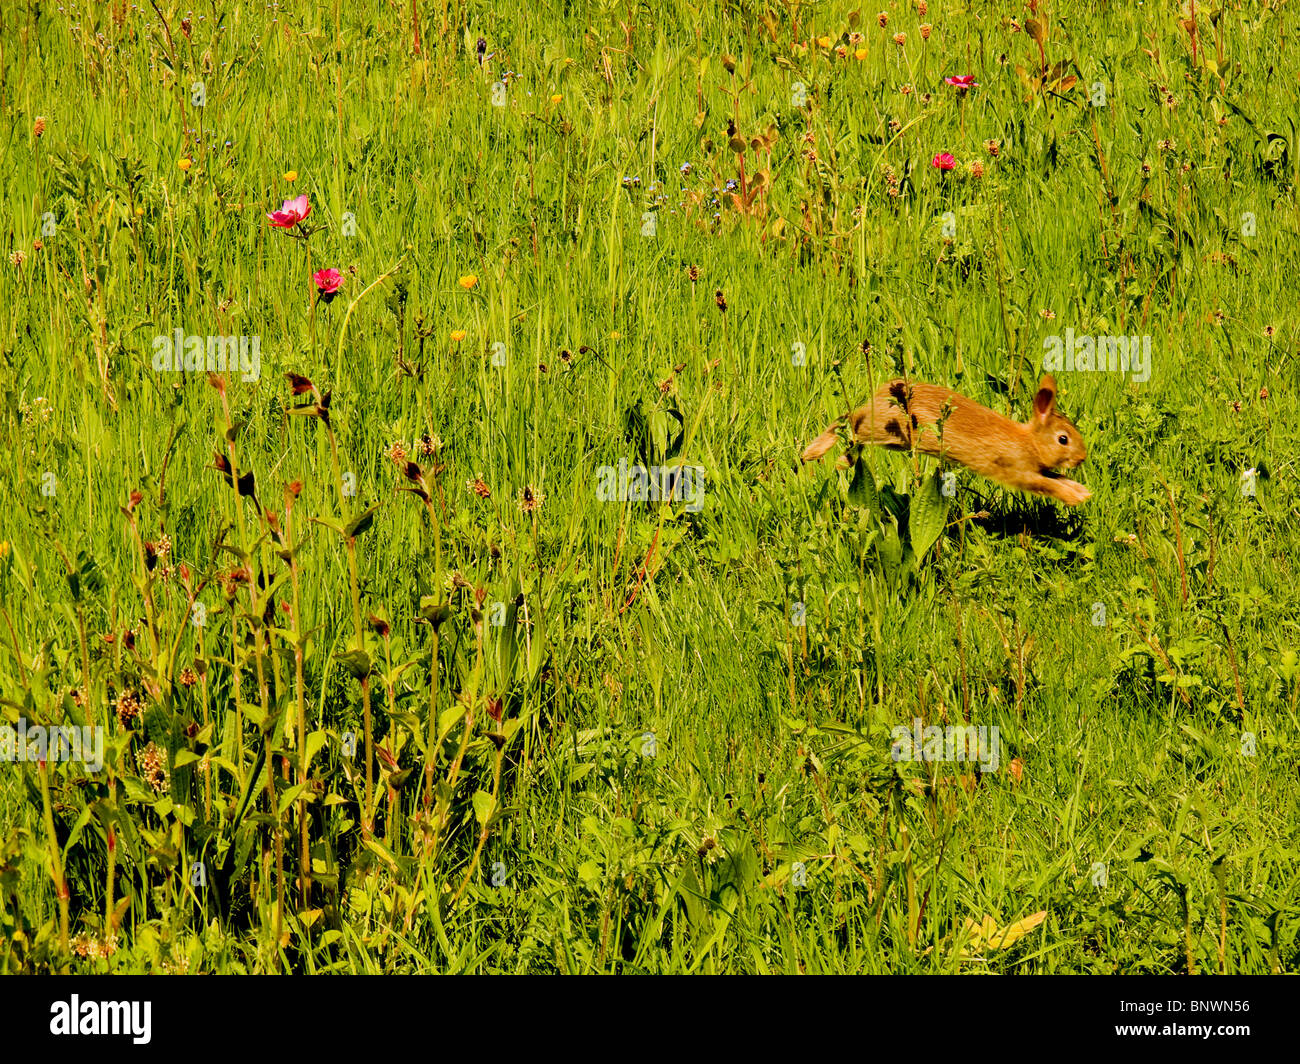 Rabbit jumping in field of wild flowers Stock Photo